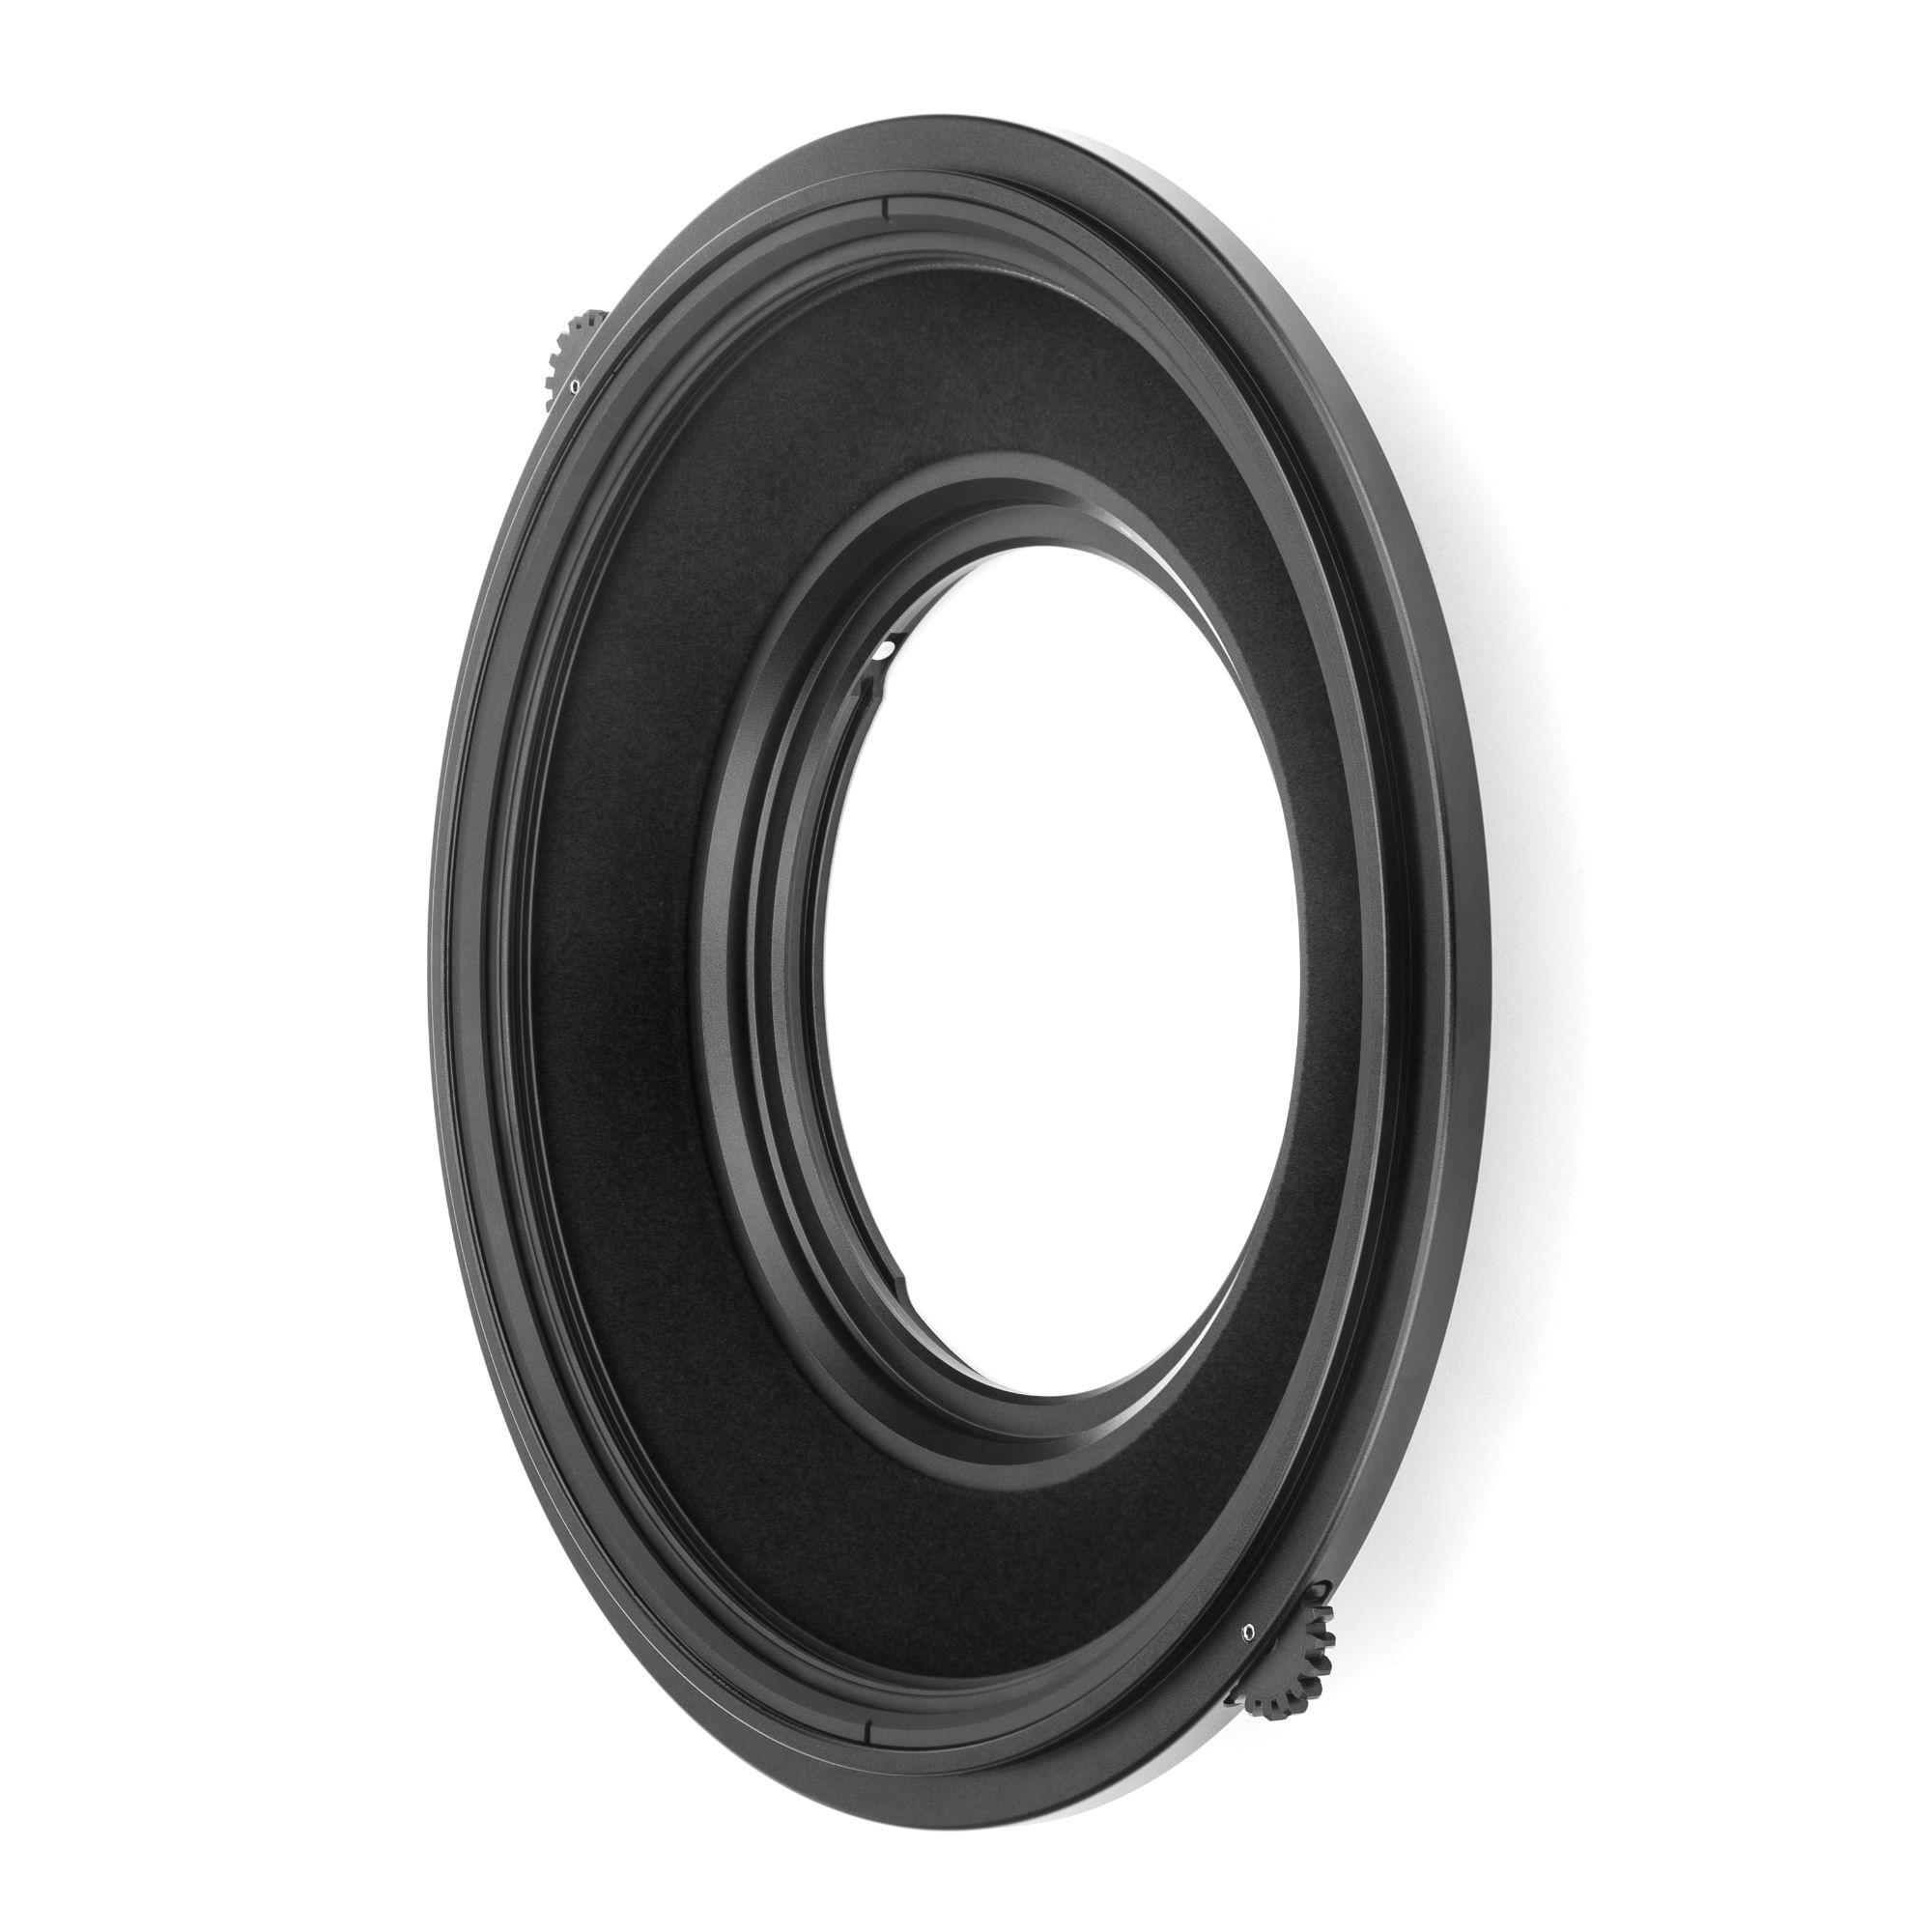 NiSi S6 150mm Filter Holder Adapter Ring for Nikon Z 14-24mm f/2.8S